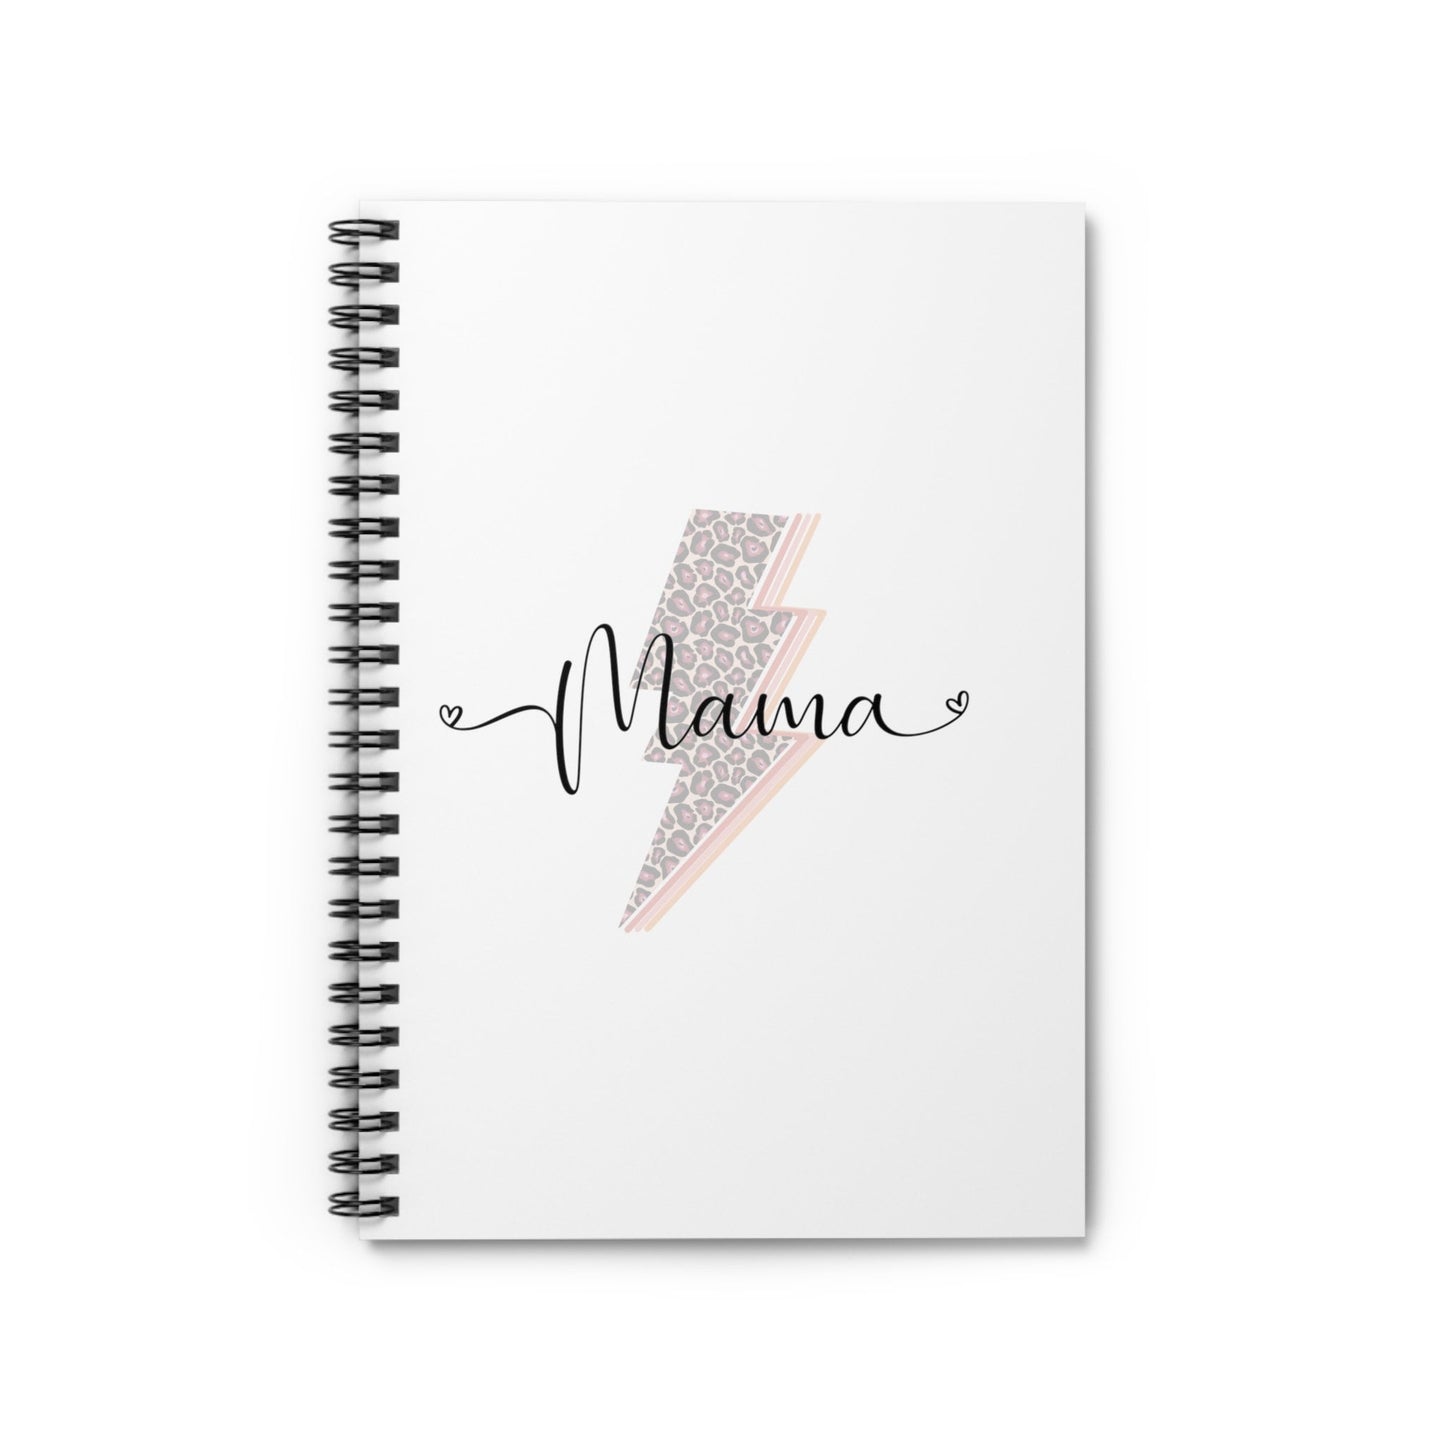 Mama Spiral Notebook - Ruled Line, Gifts for her, Gifts for Mom